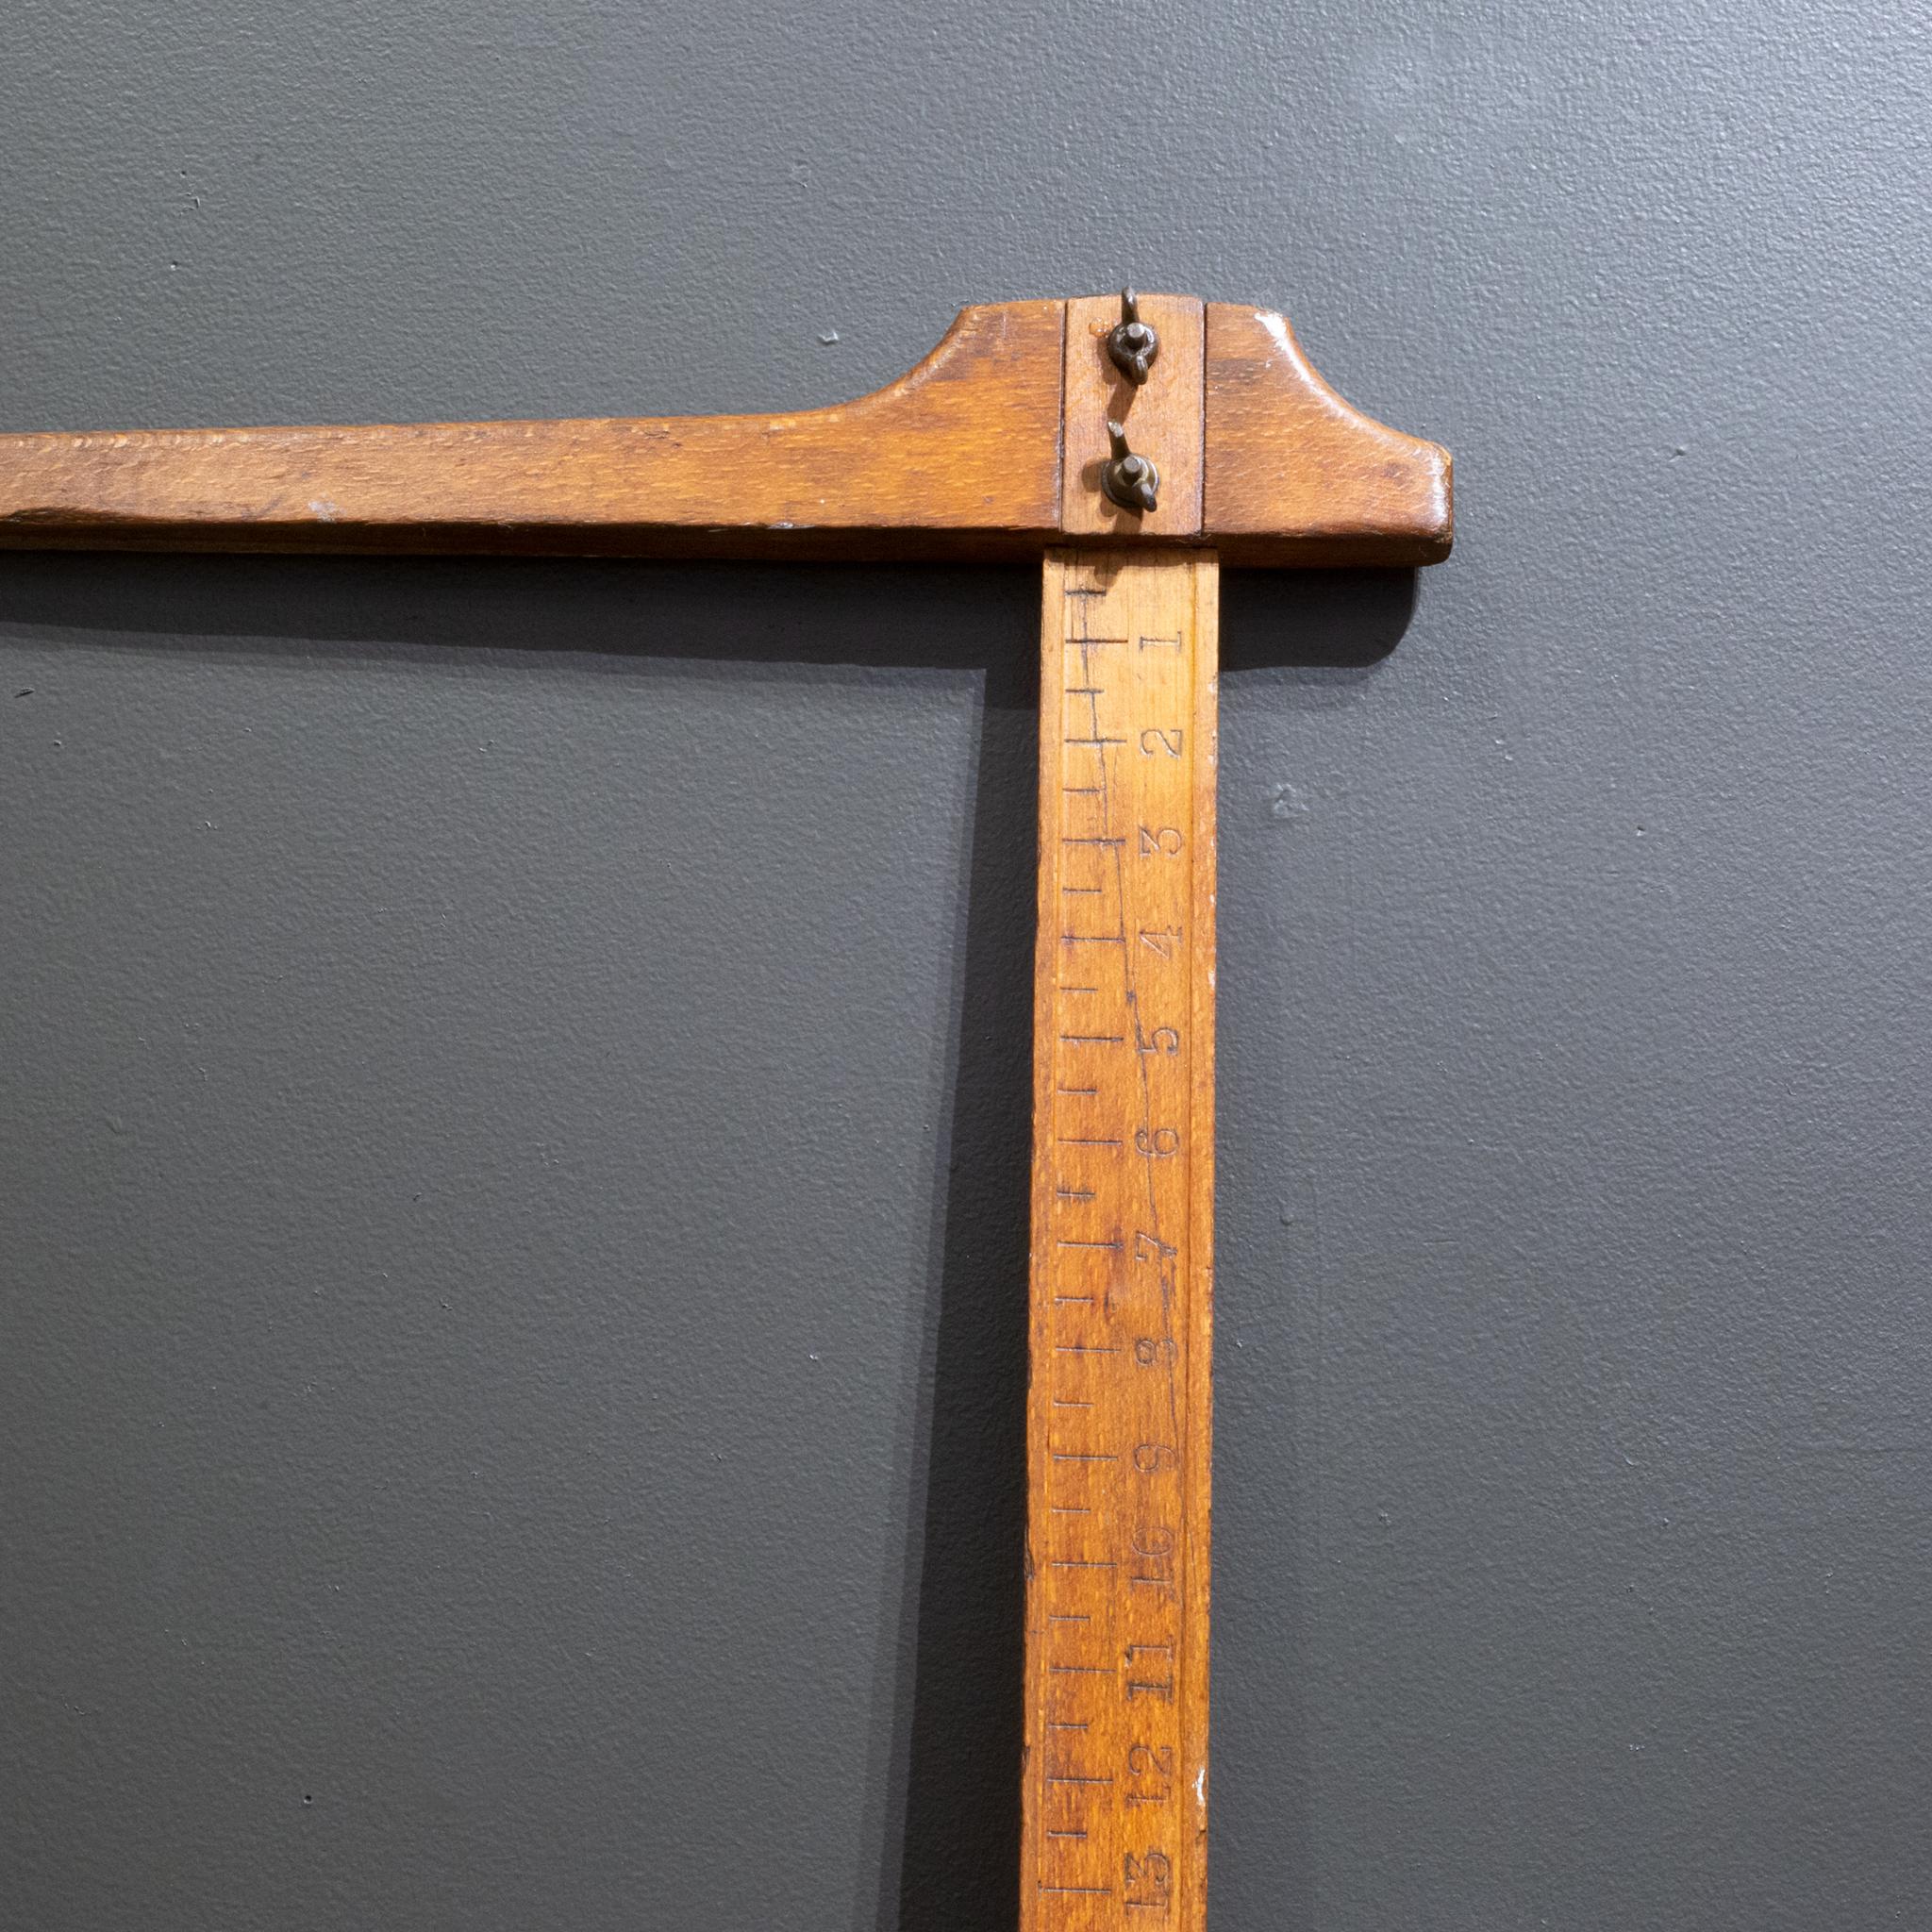 19th Century Late 19th c. Antique Forester's Log Measuring Caliper, c.1890